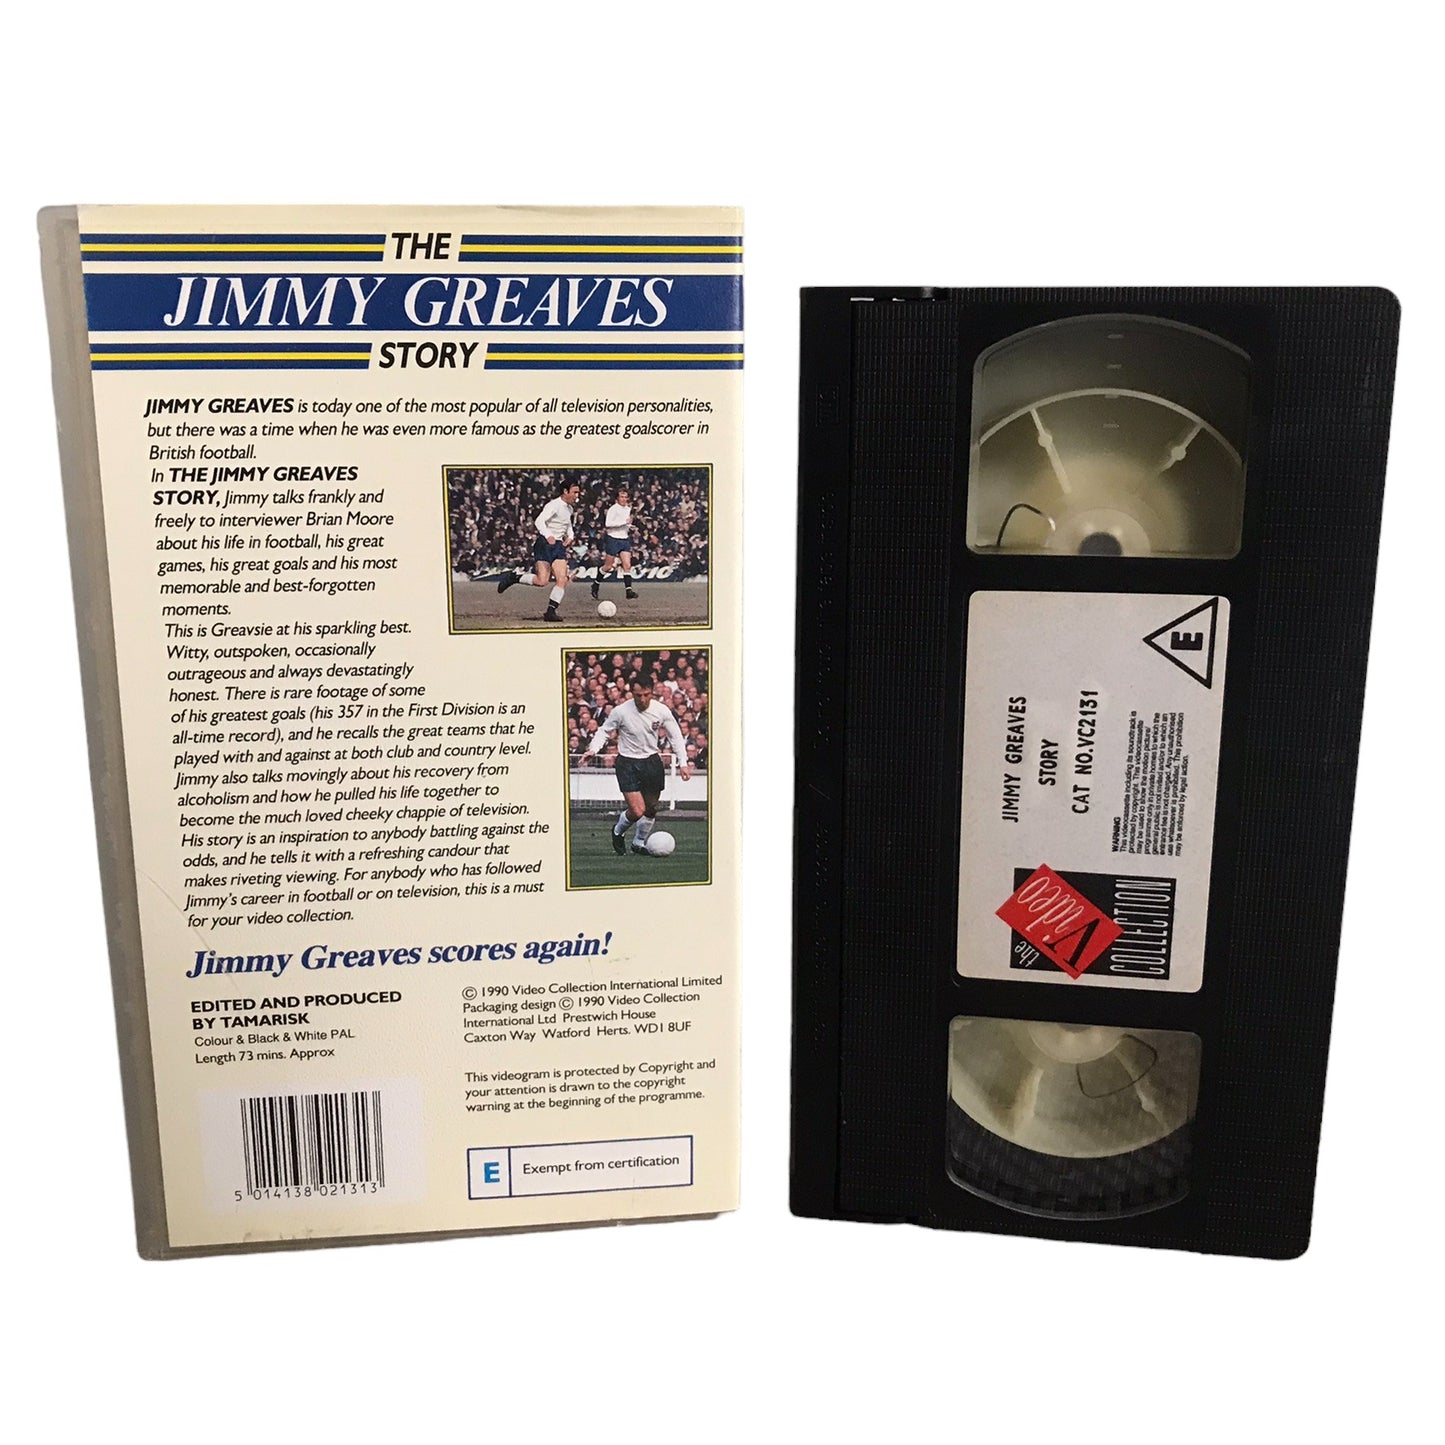 The Jimmy Greaves - The Greatest Goalscorer of Them All! - Jimmy Greaves - The Video Collection - Sports - Pal - VHS-